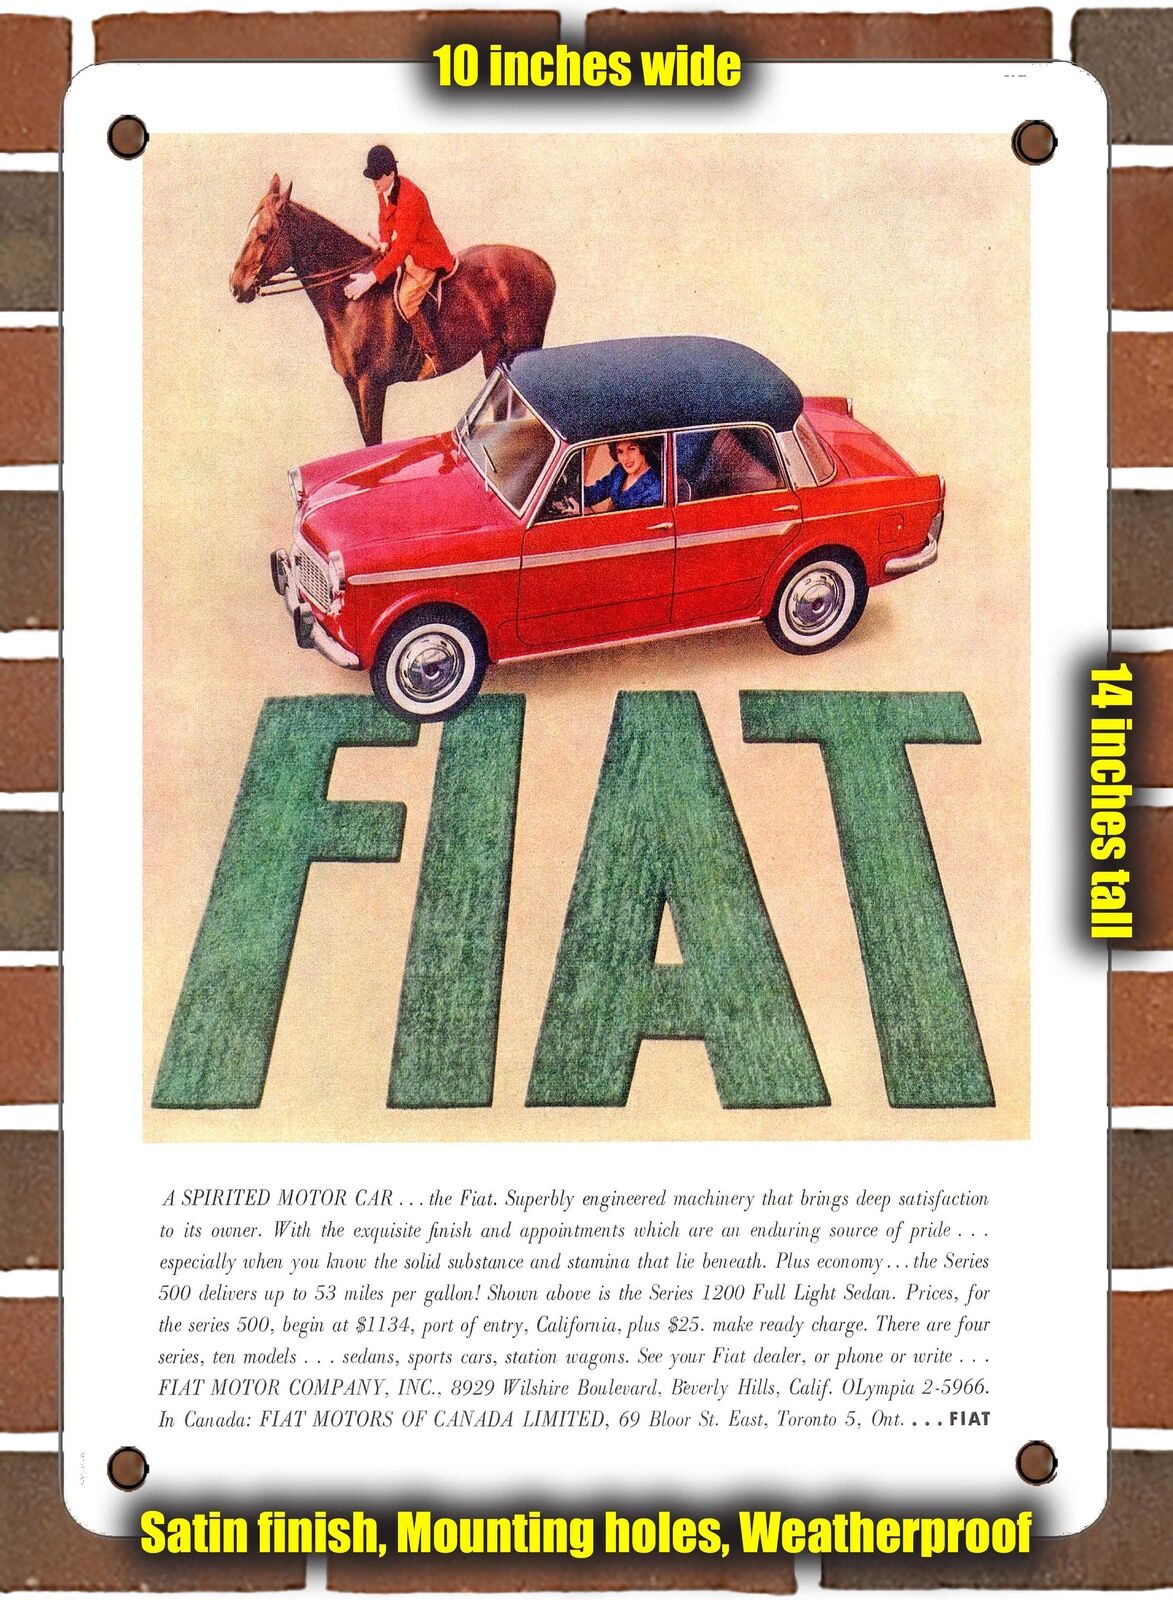 METAL SIGN - 1959 Fiat 1200 a Spirited Motor Car - 10x14 Inches